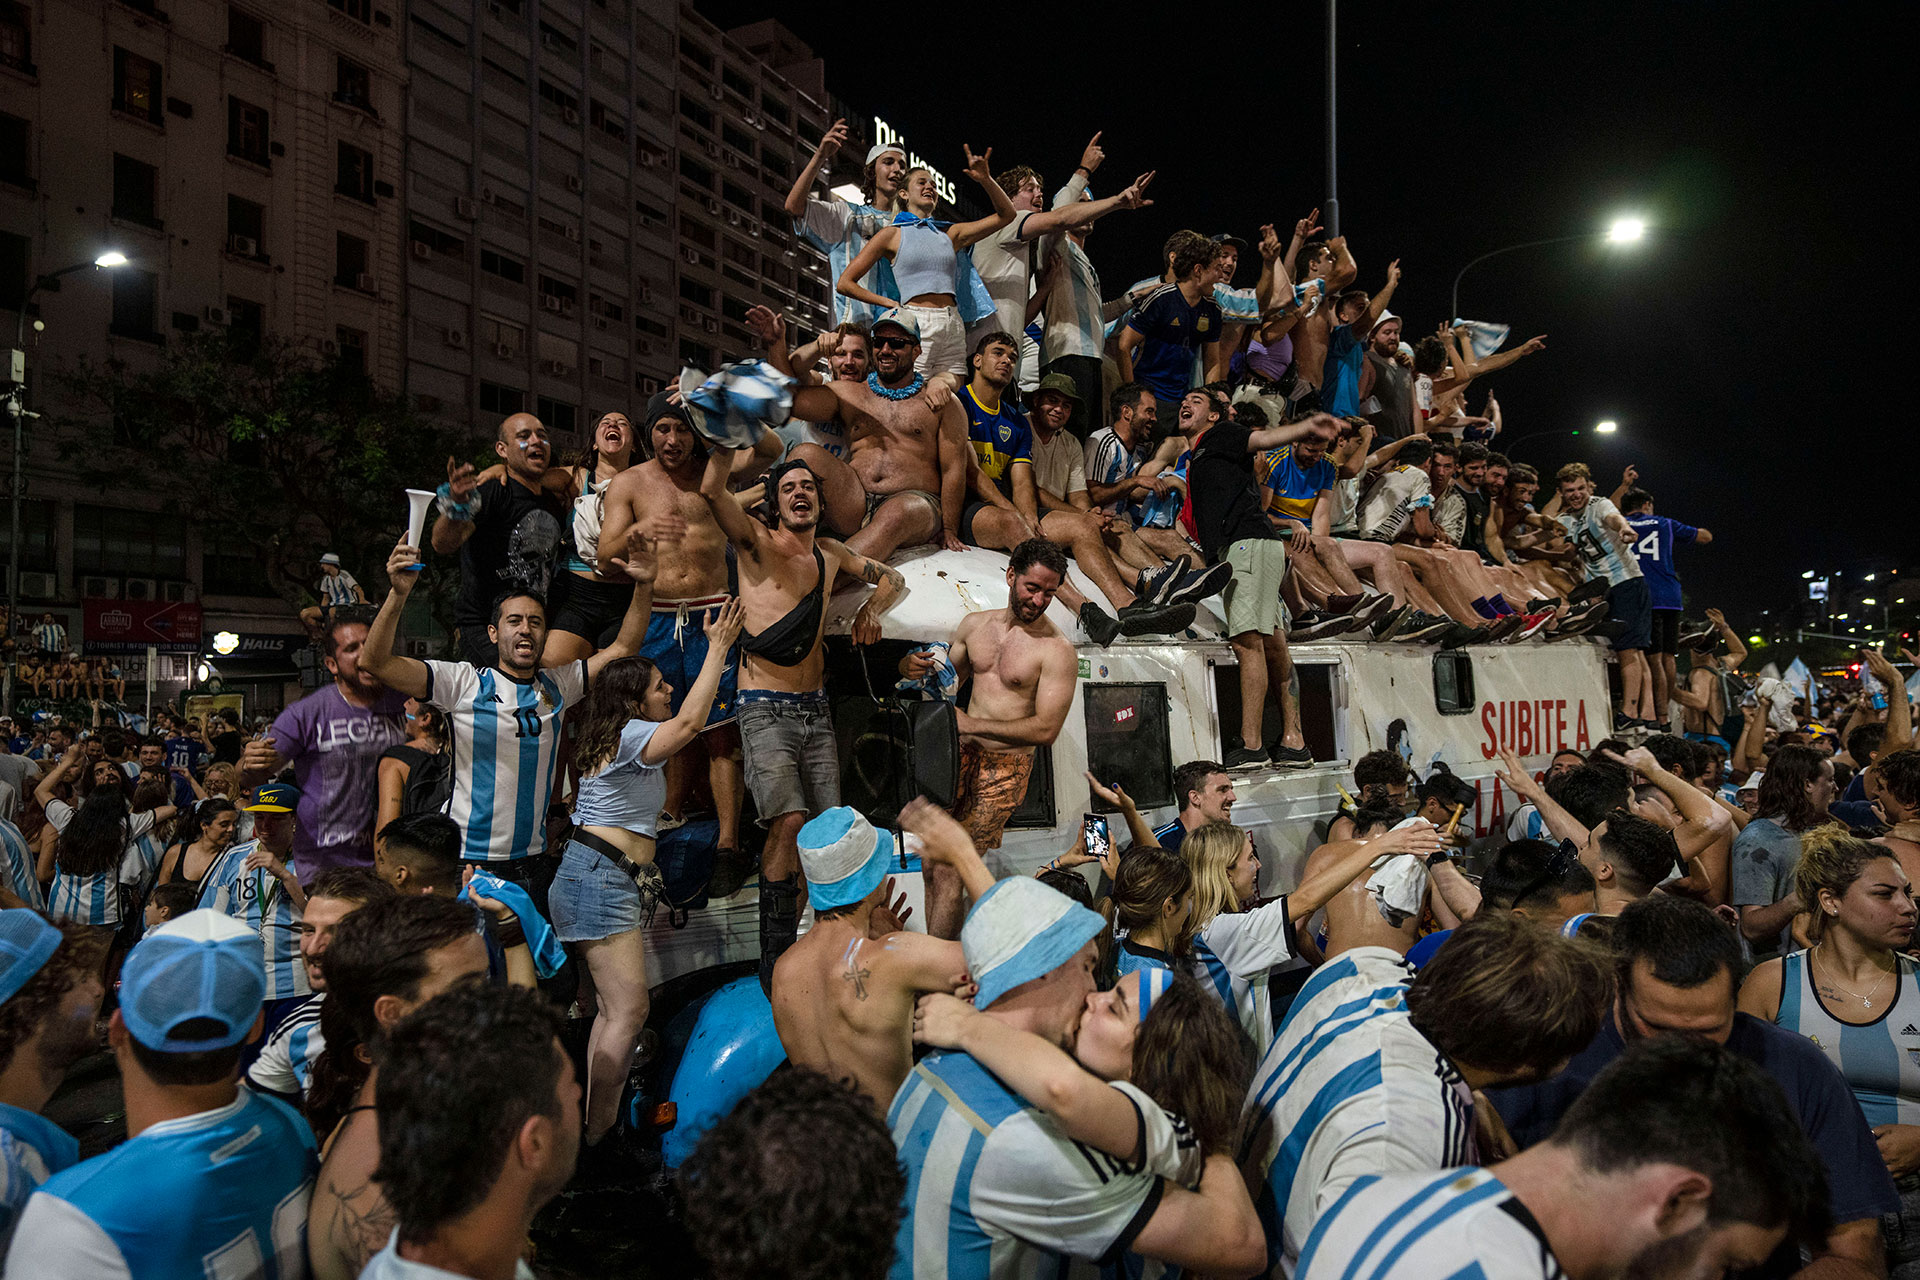 A couple kiss as other soccer fans celebrate Argentina's victory over France in the World Cup final soccer match, in Buenos Aires, Argentina, Sunday, Dec. 18, 2022. (AP Photo/Rodrigo Abd)